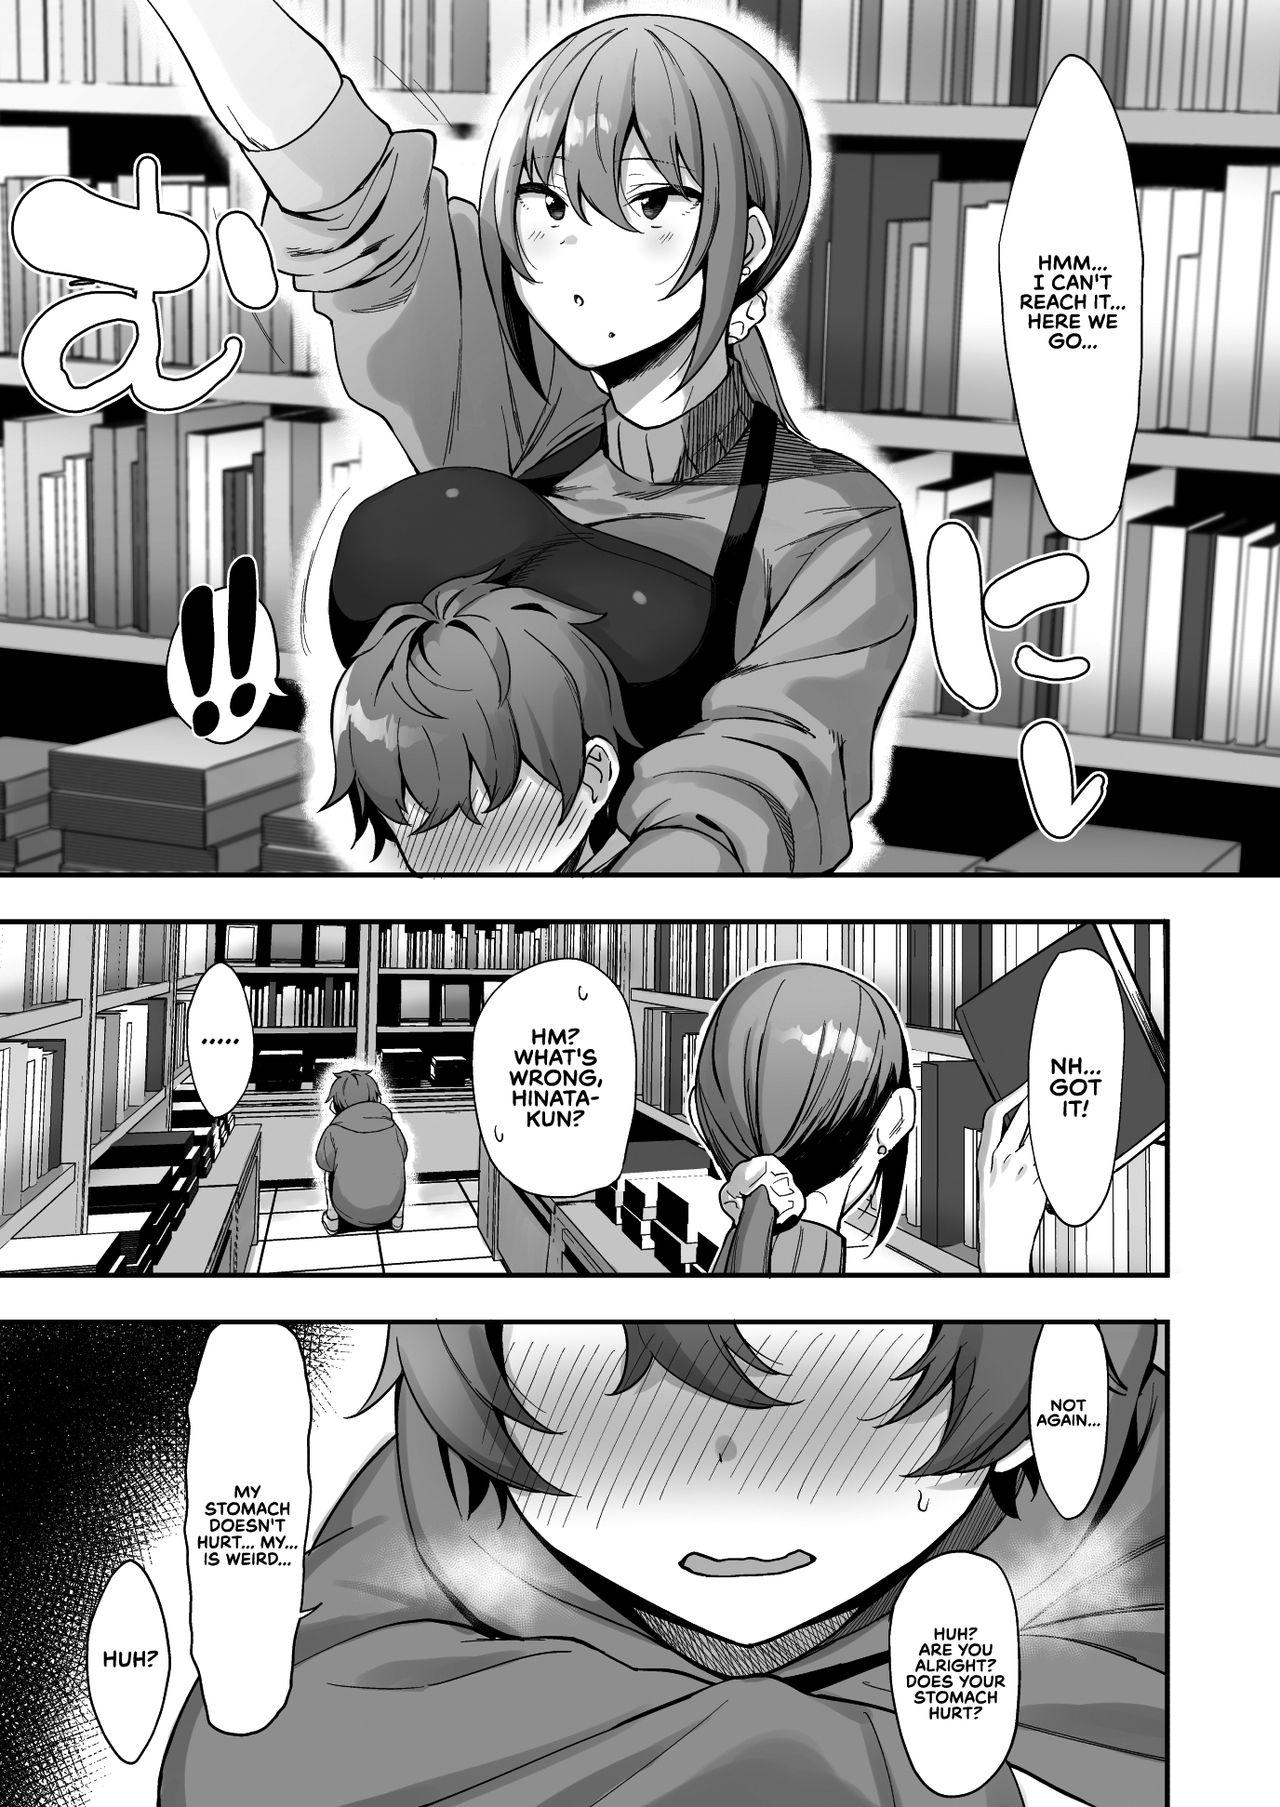 Spy Camera Furuhonya no Onee-san to | With The Lady From The Used Book Shop - Original Big Cock - Page 8